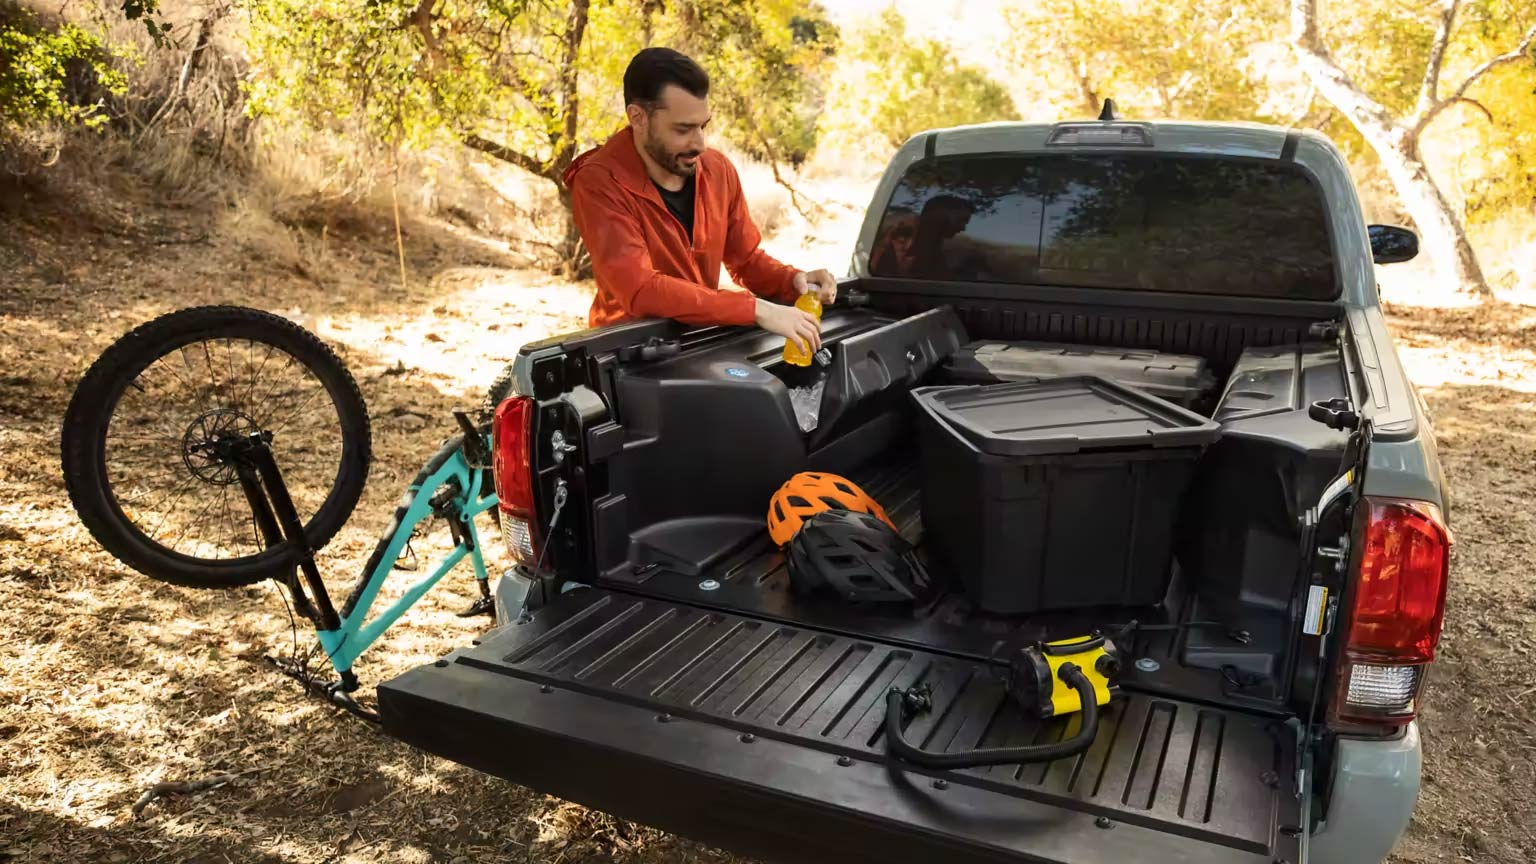 Toyota Tacoma With Gear In Back, having more space then the Ford Ranger.